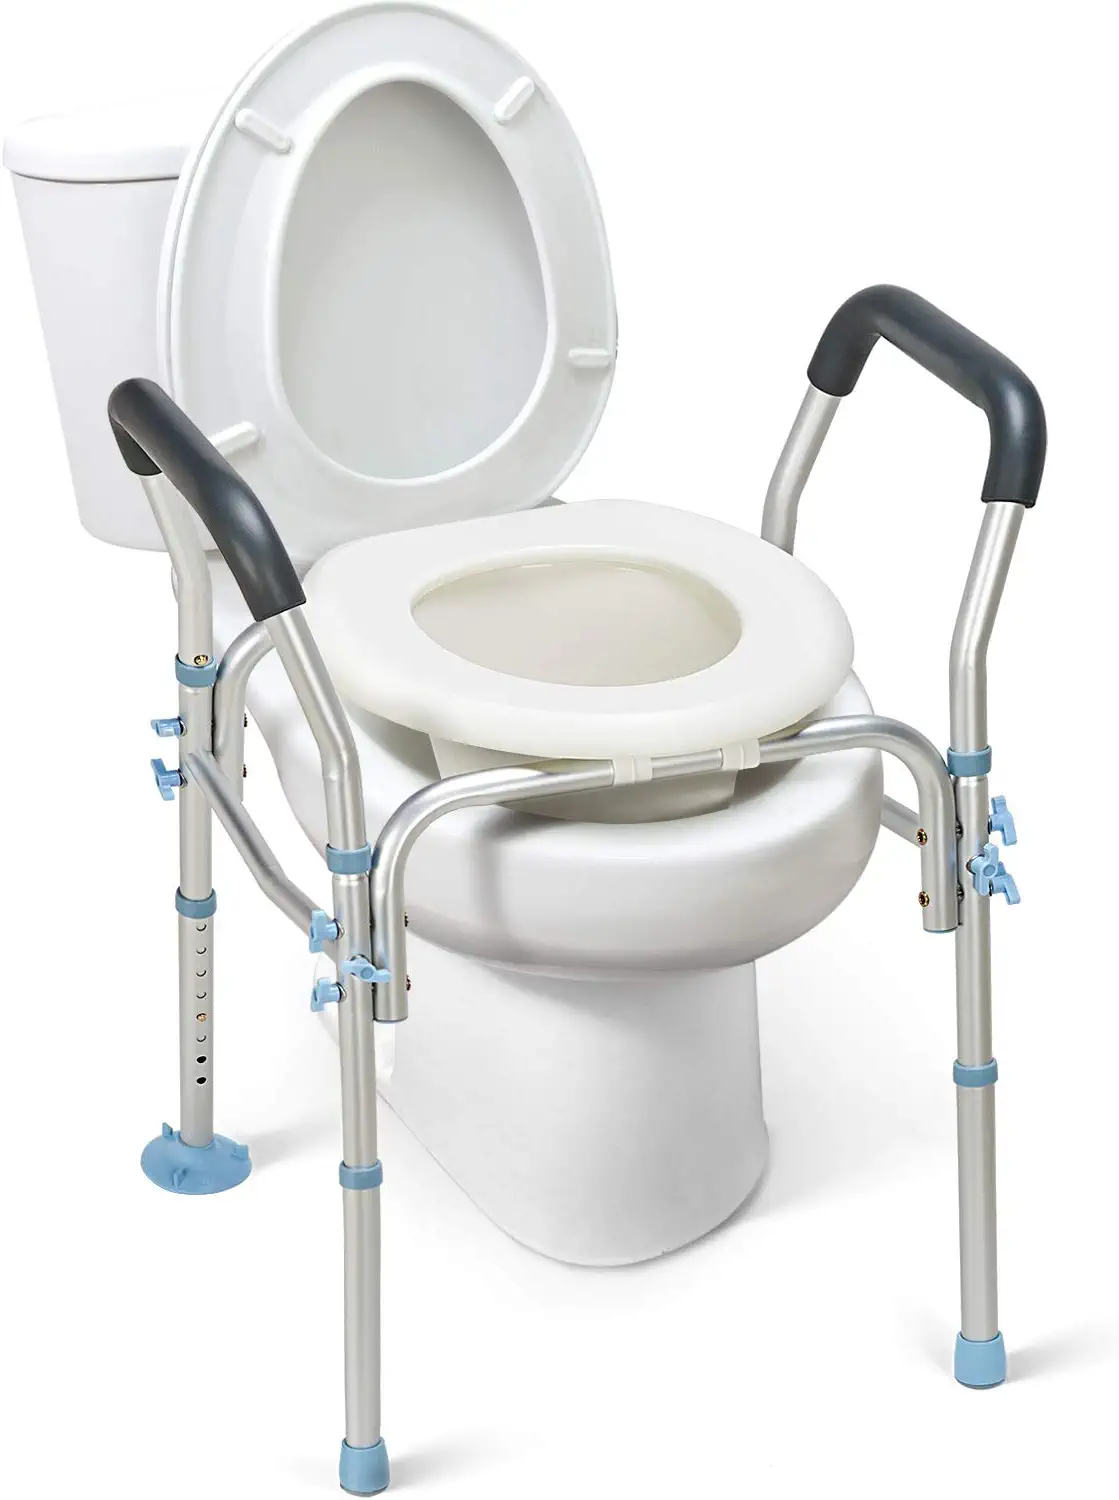 stand toilet seat